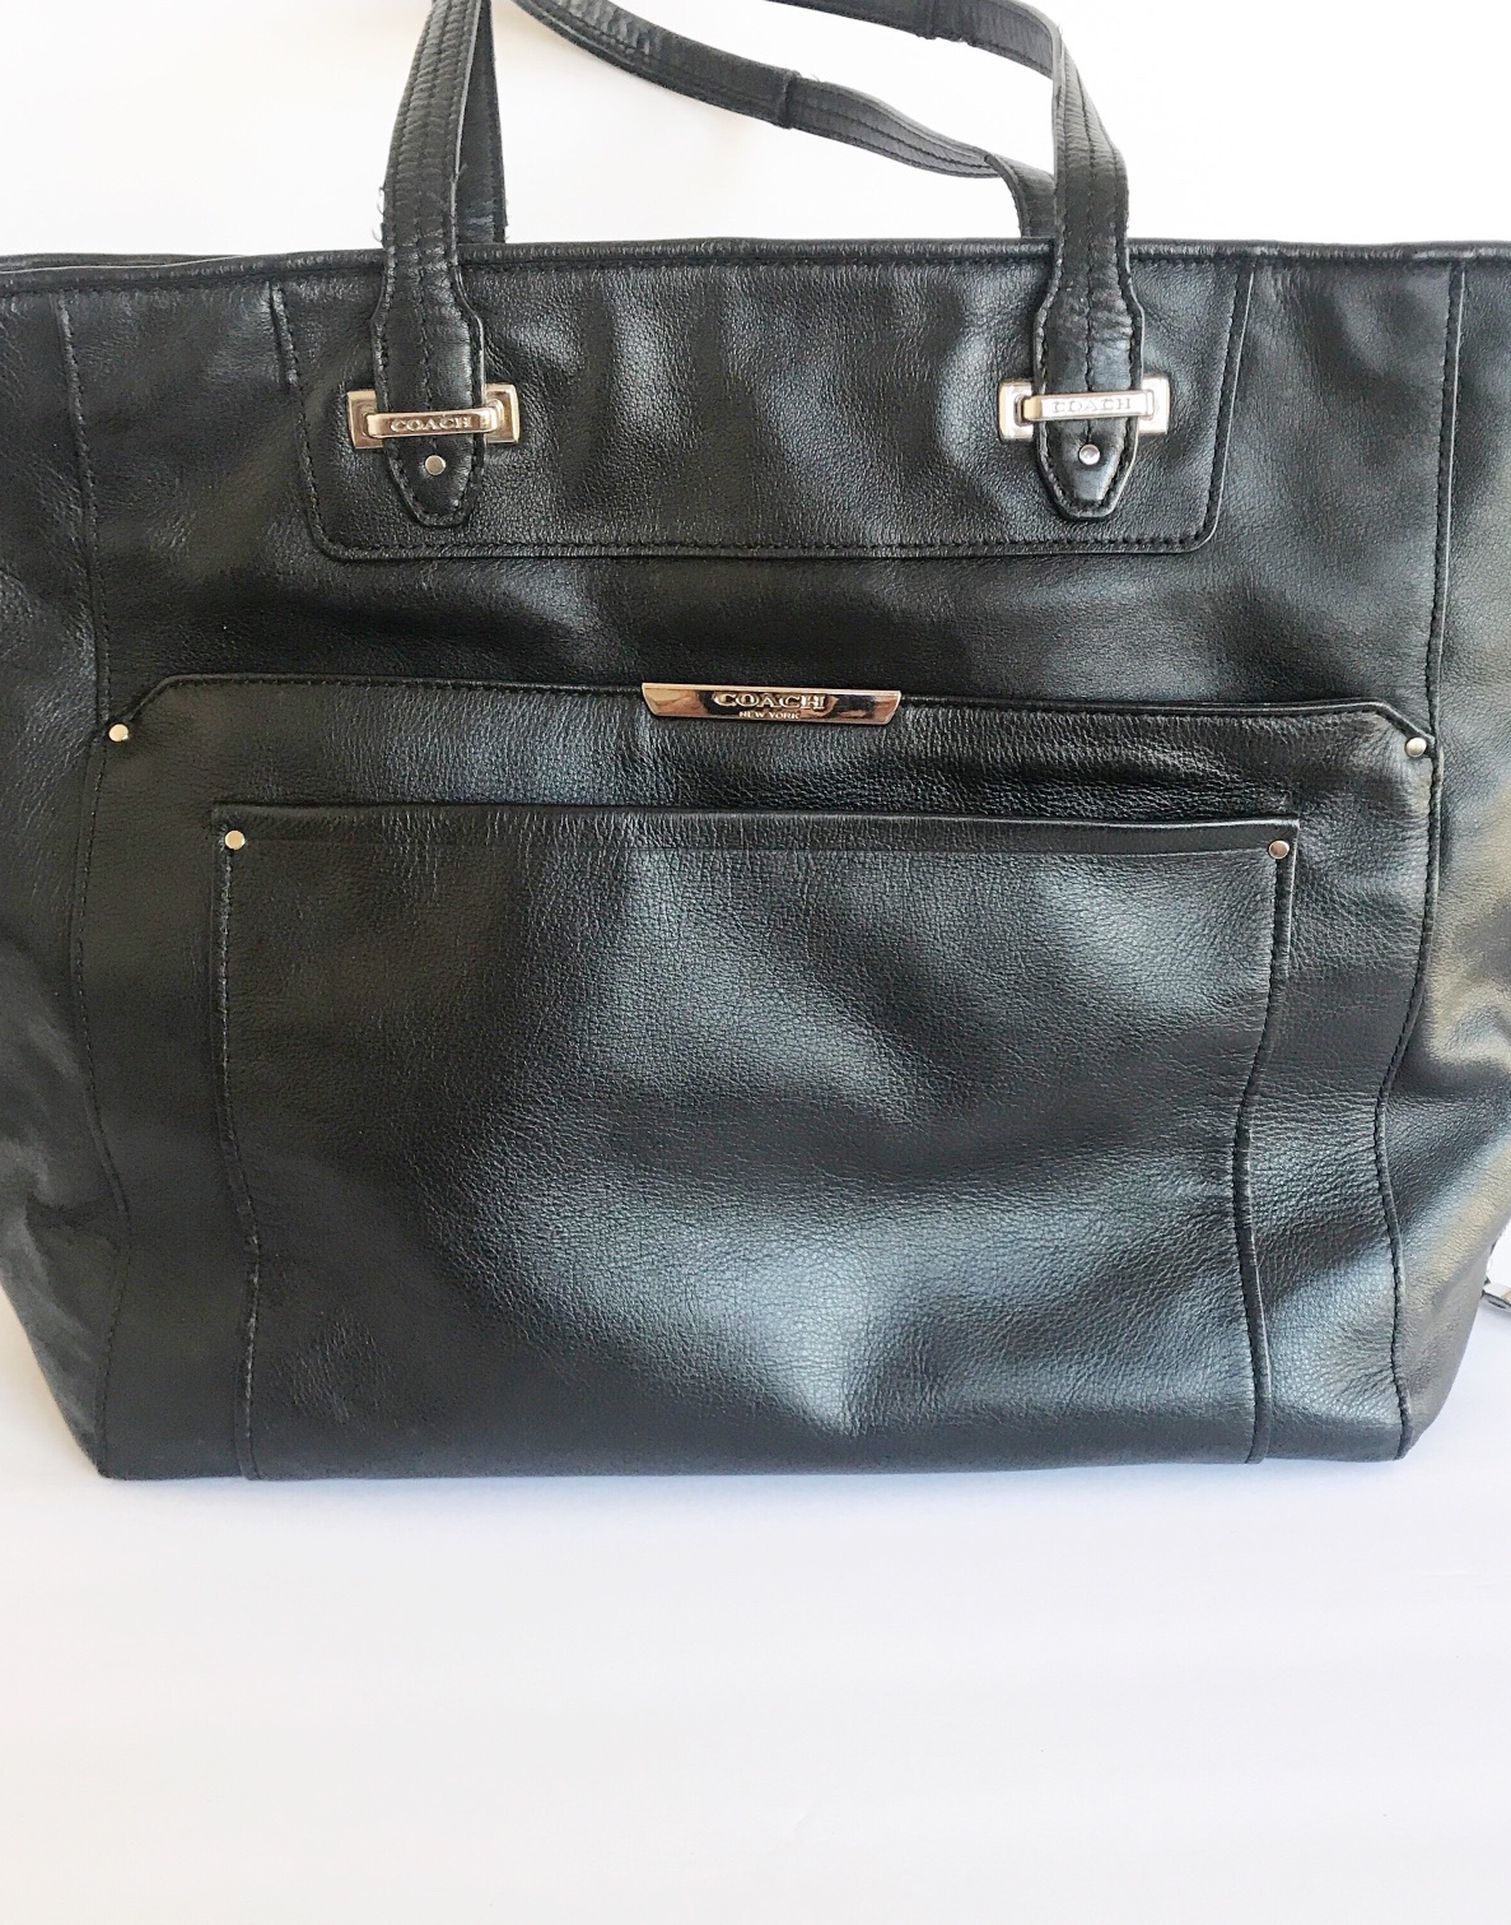 Large Black Tote Purse With Zipper